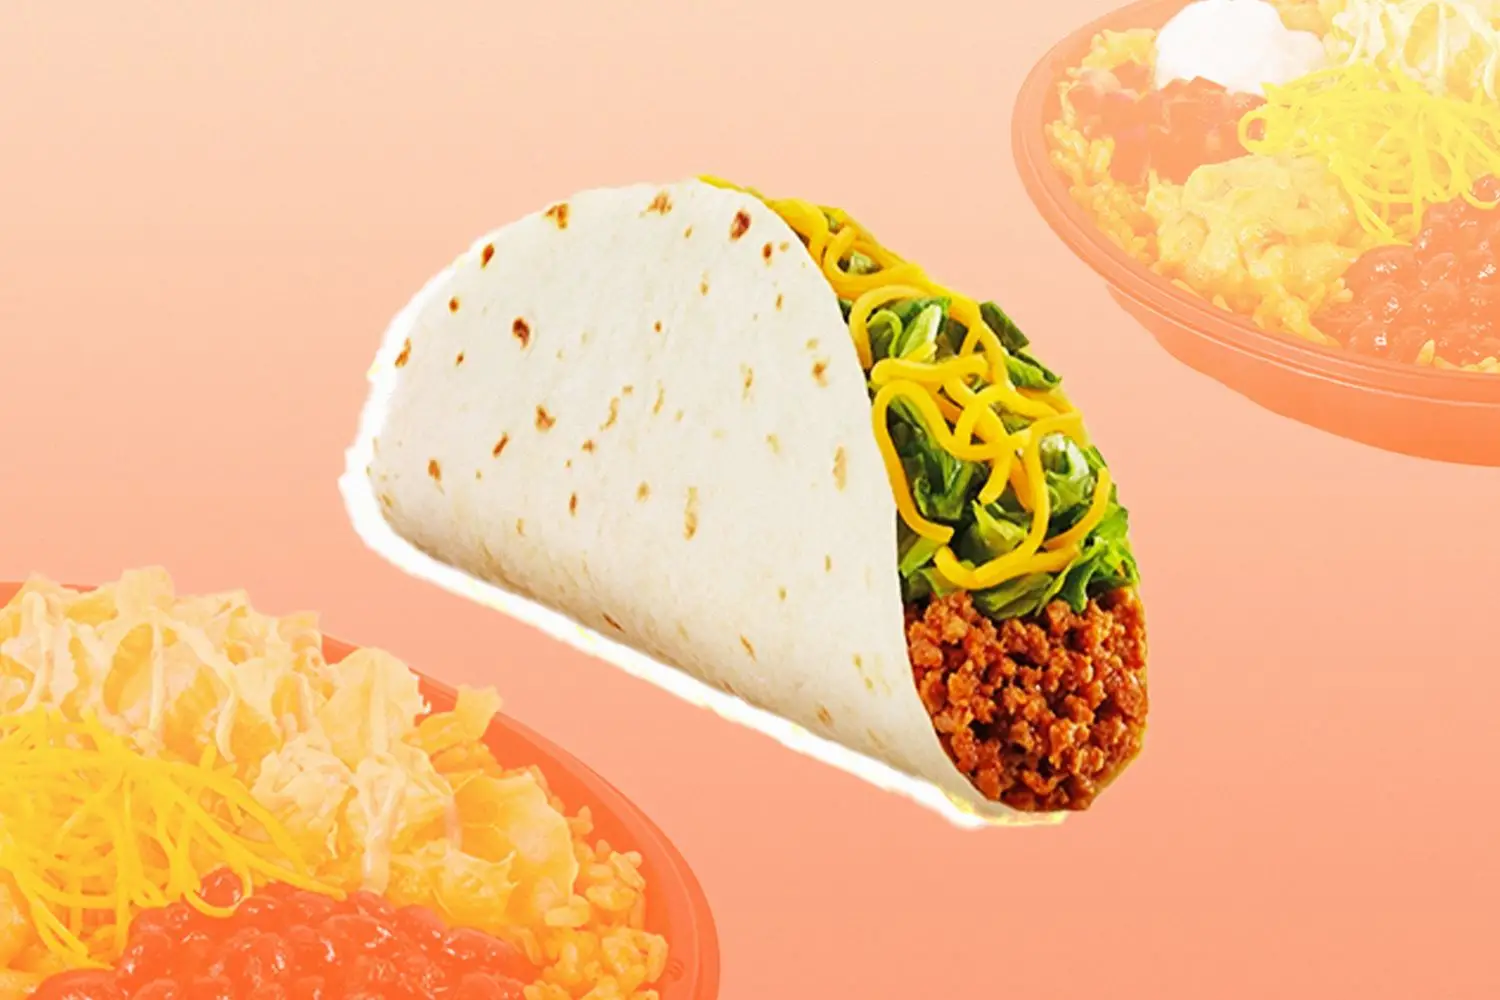 Discover the Taco Bell Calorie Menu A Guide to Low-Calorie Options